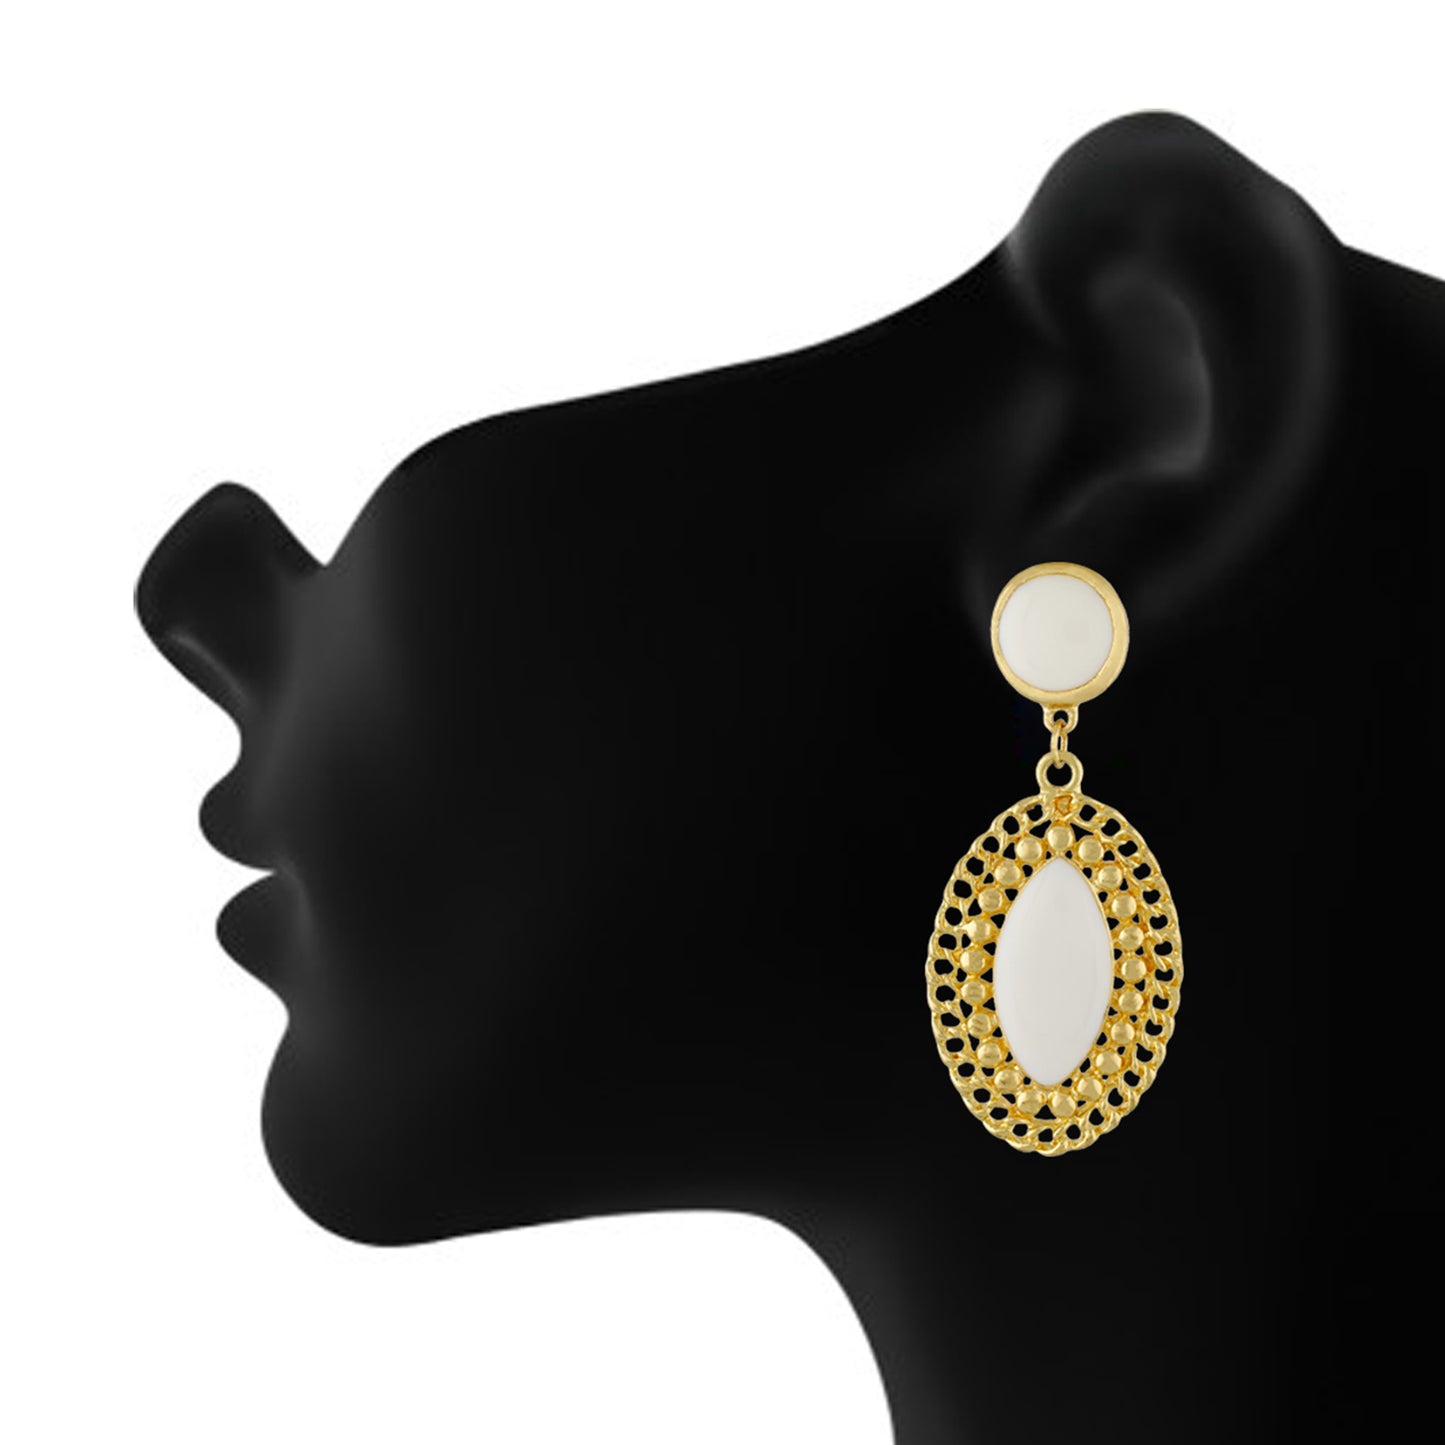 Stylish White and Gold Colour Oval Shape Enamel Enhanced Earring for Girls and Women